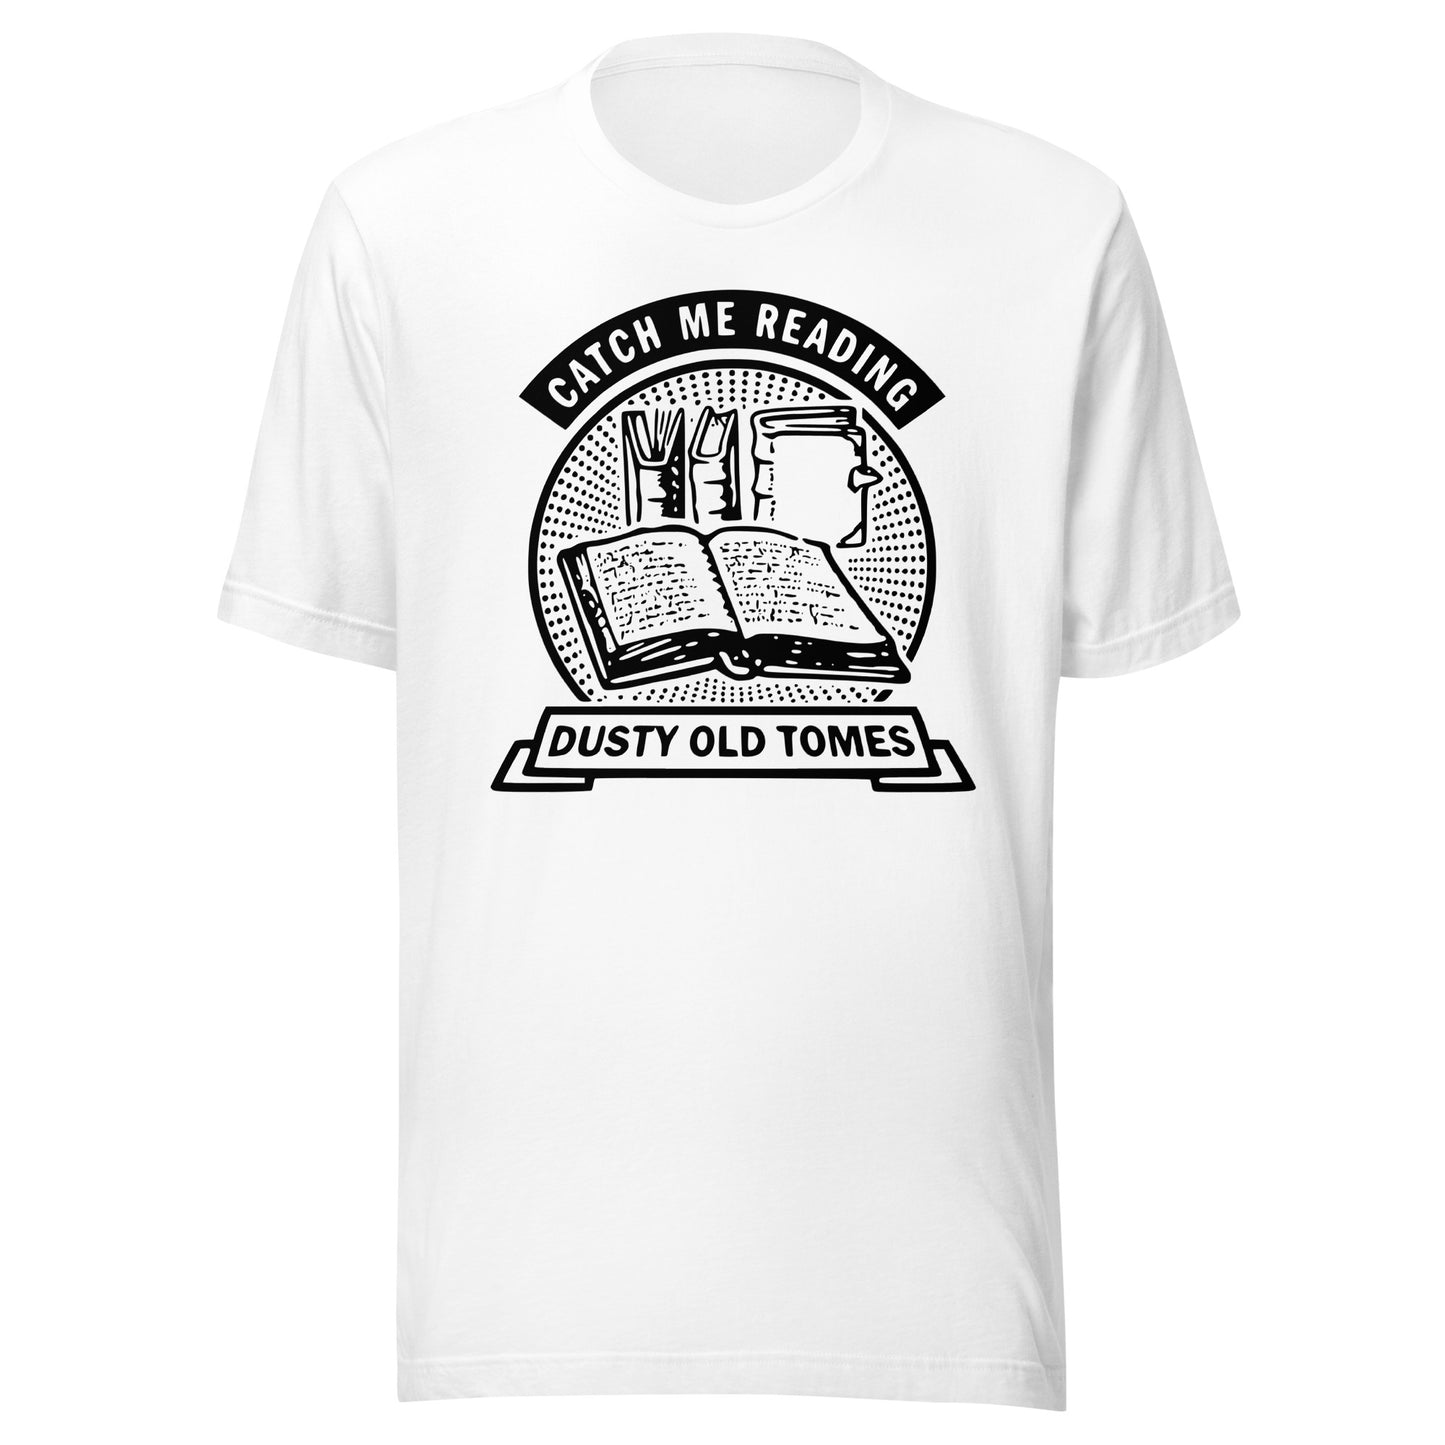 "Dusty Old Tomes" Unisex t-shirt